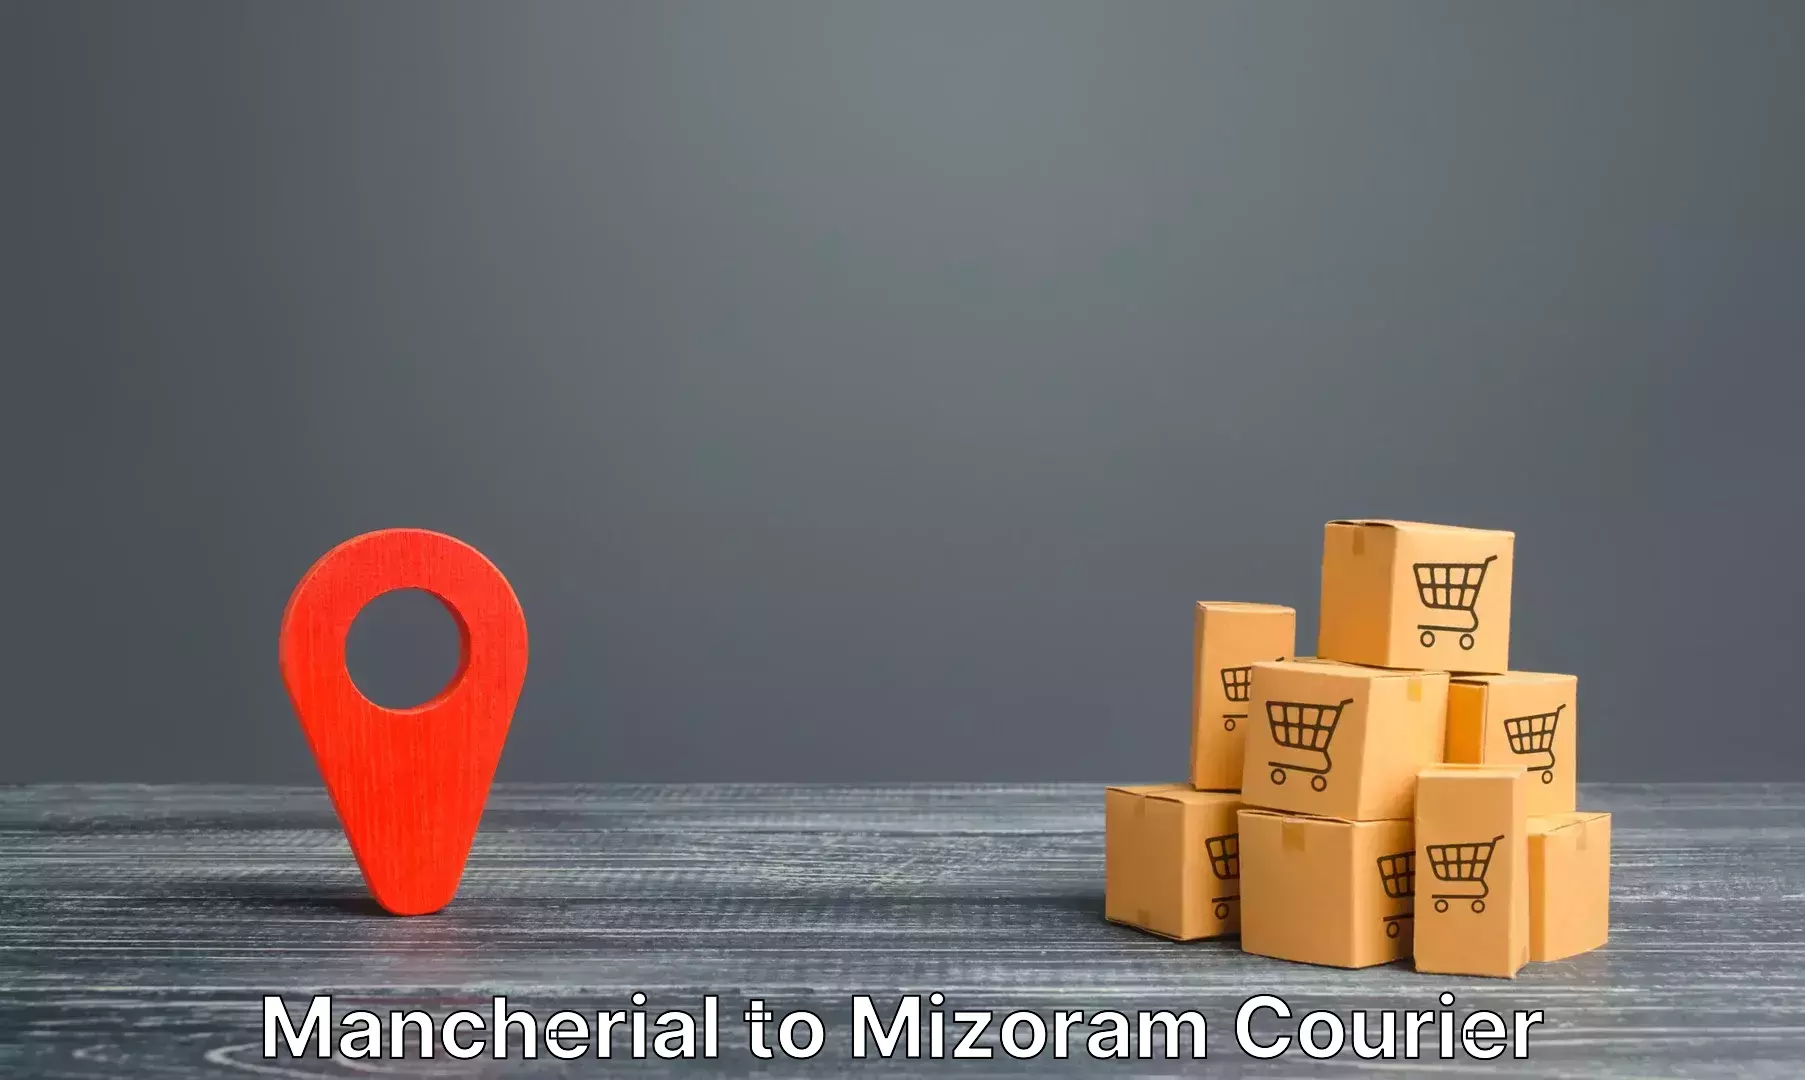 Luggage delivery app Mancherial to Darlawn